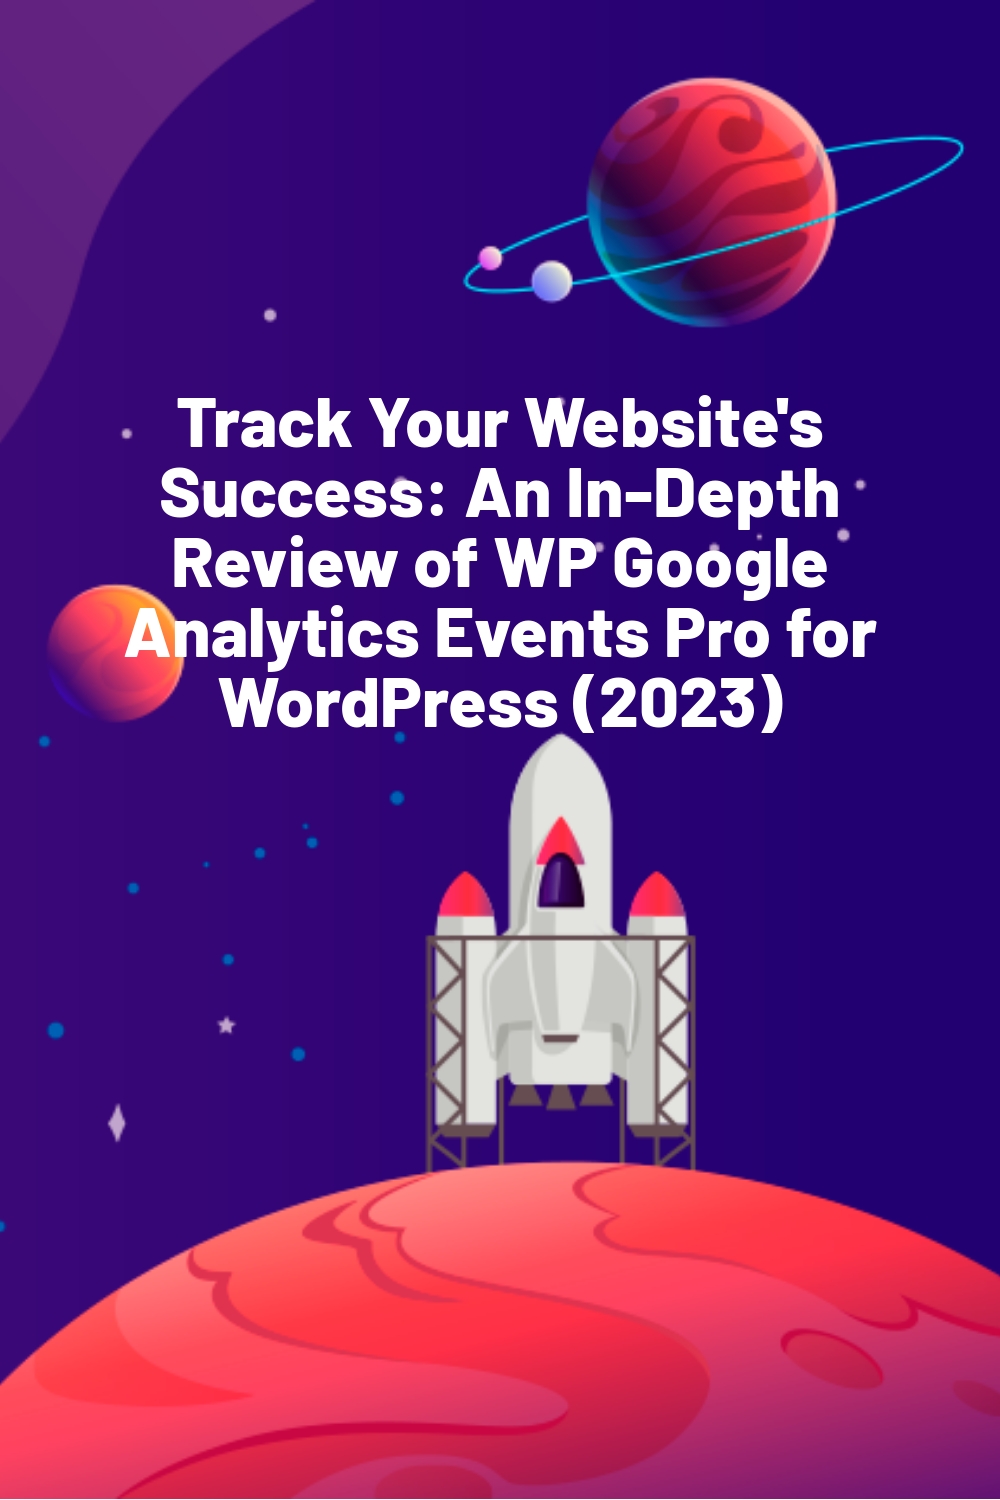 Track Your Website’s Success: An In-Depth Review of WP Google Analytics Events Pro for WordPress (2023)